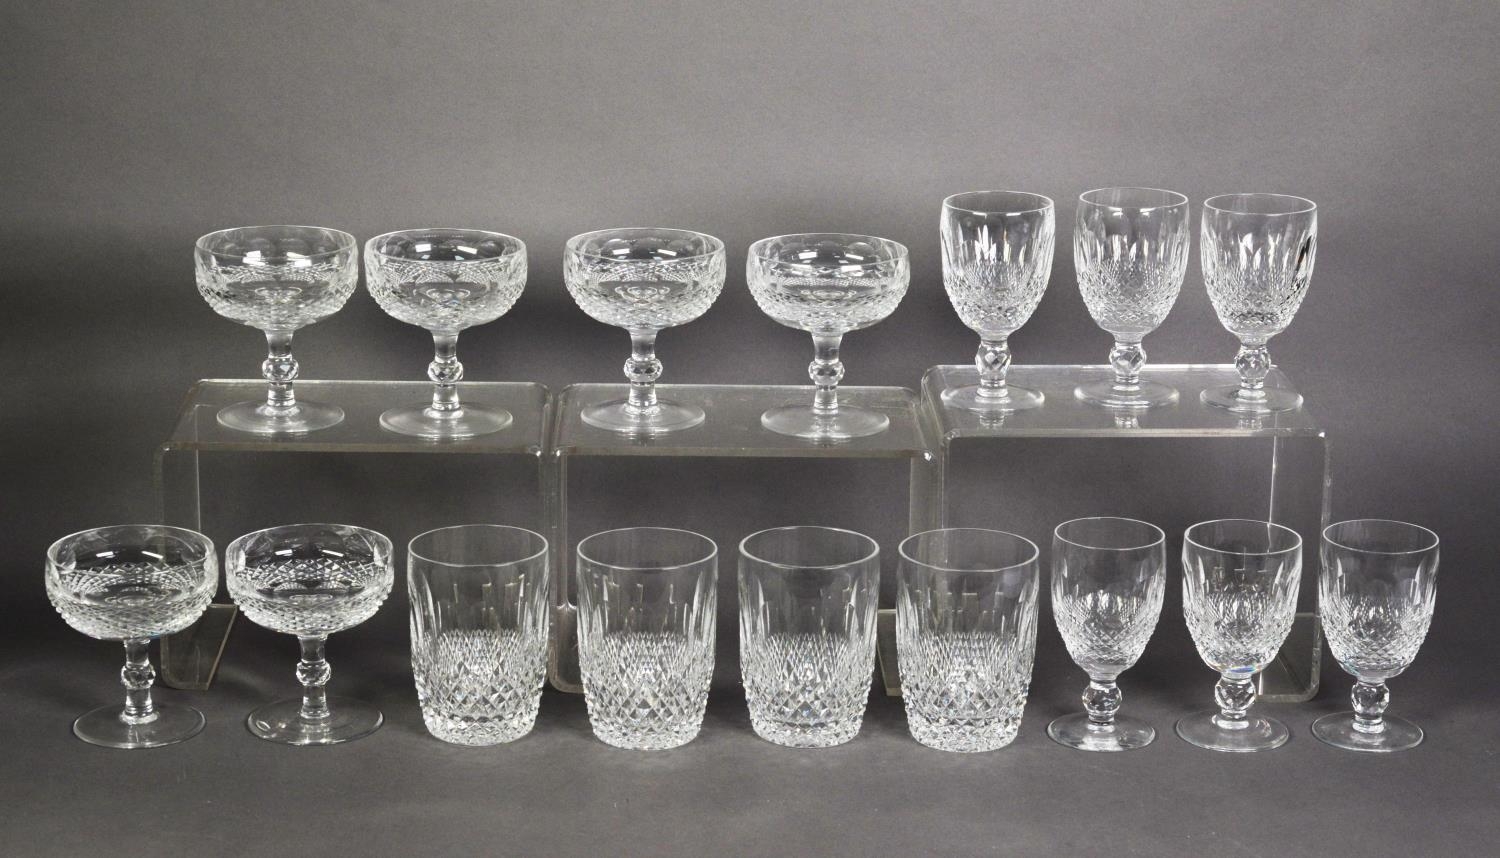 WATERFORD COLEEN PATTERN: a set of six champagne coupes on knopped stems, six wine glasses and